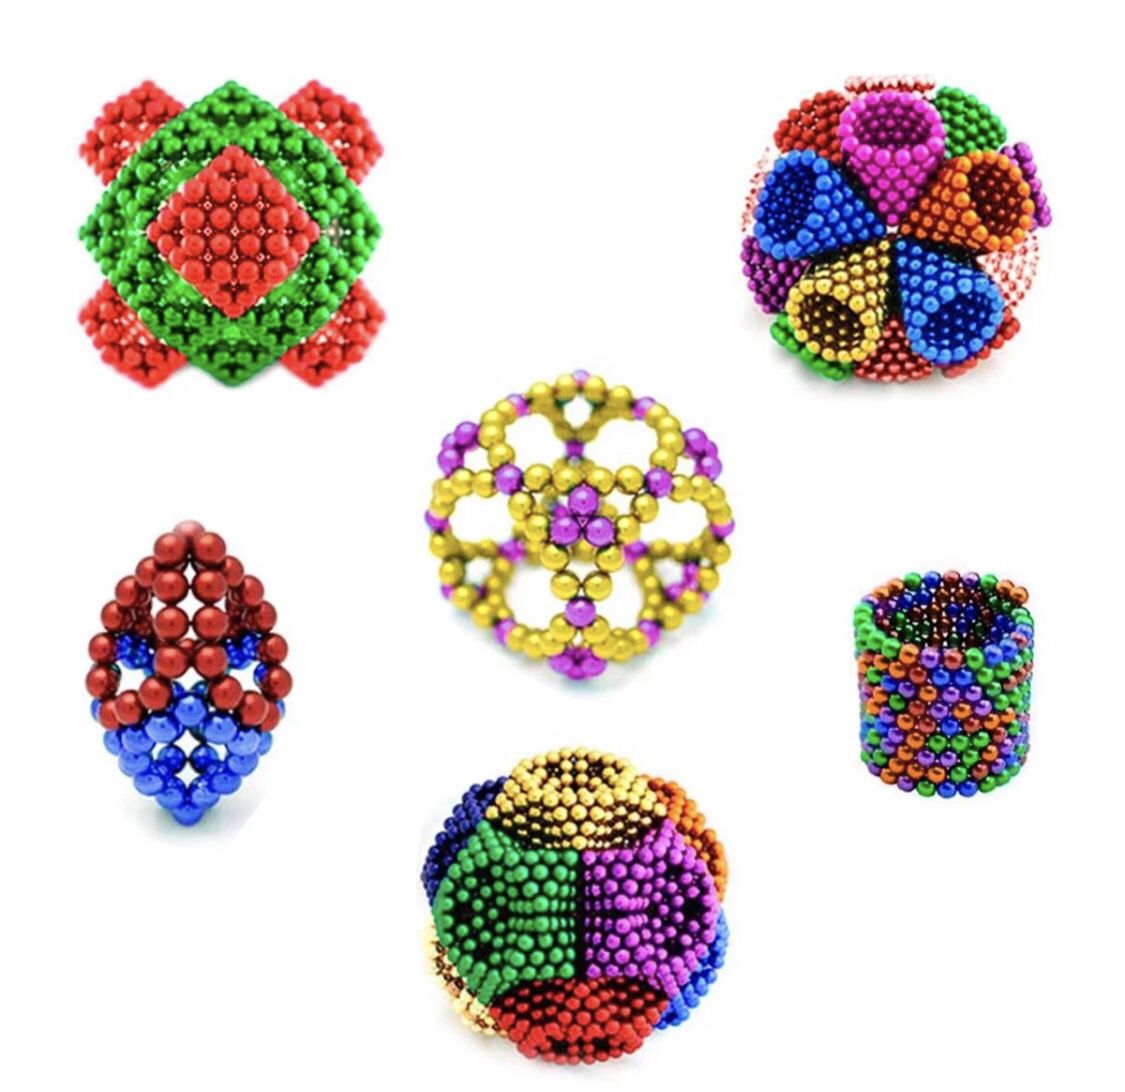 Start Your Christmas Shopping-Yaranka 546Pcs Magnetic Balls-Best Stress/Anxiety Relief Toy Set